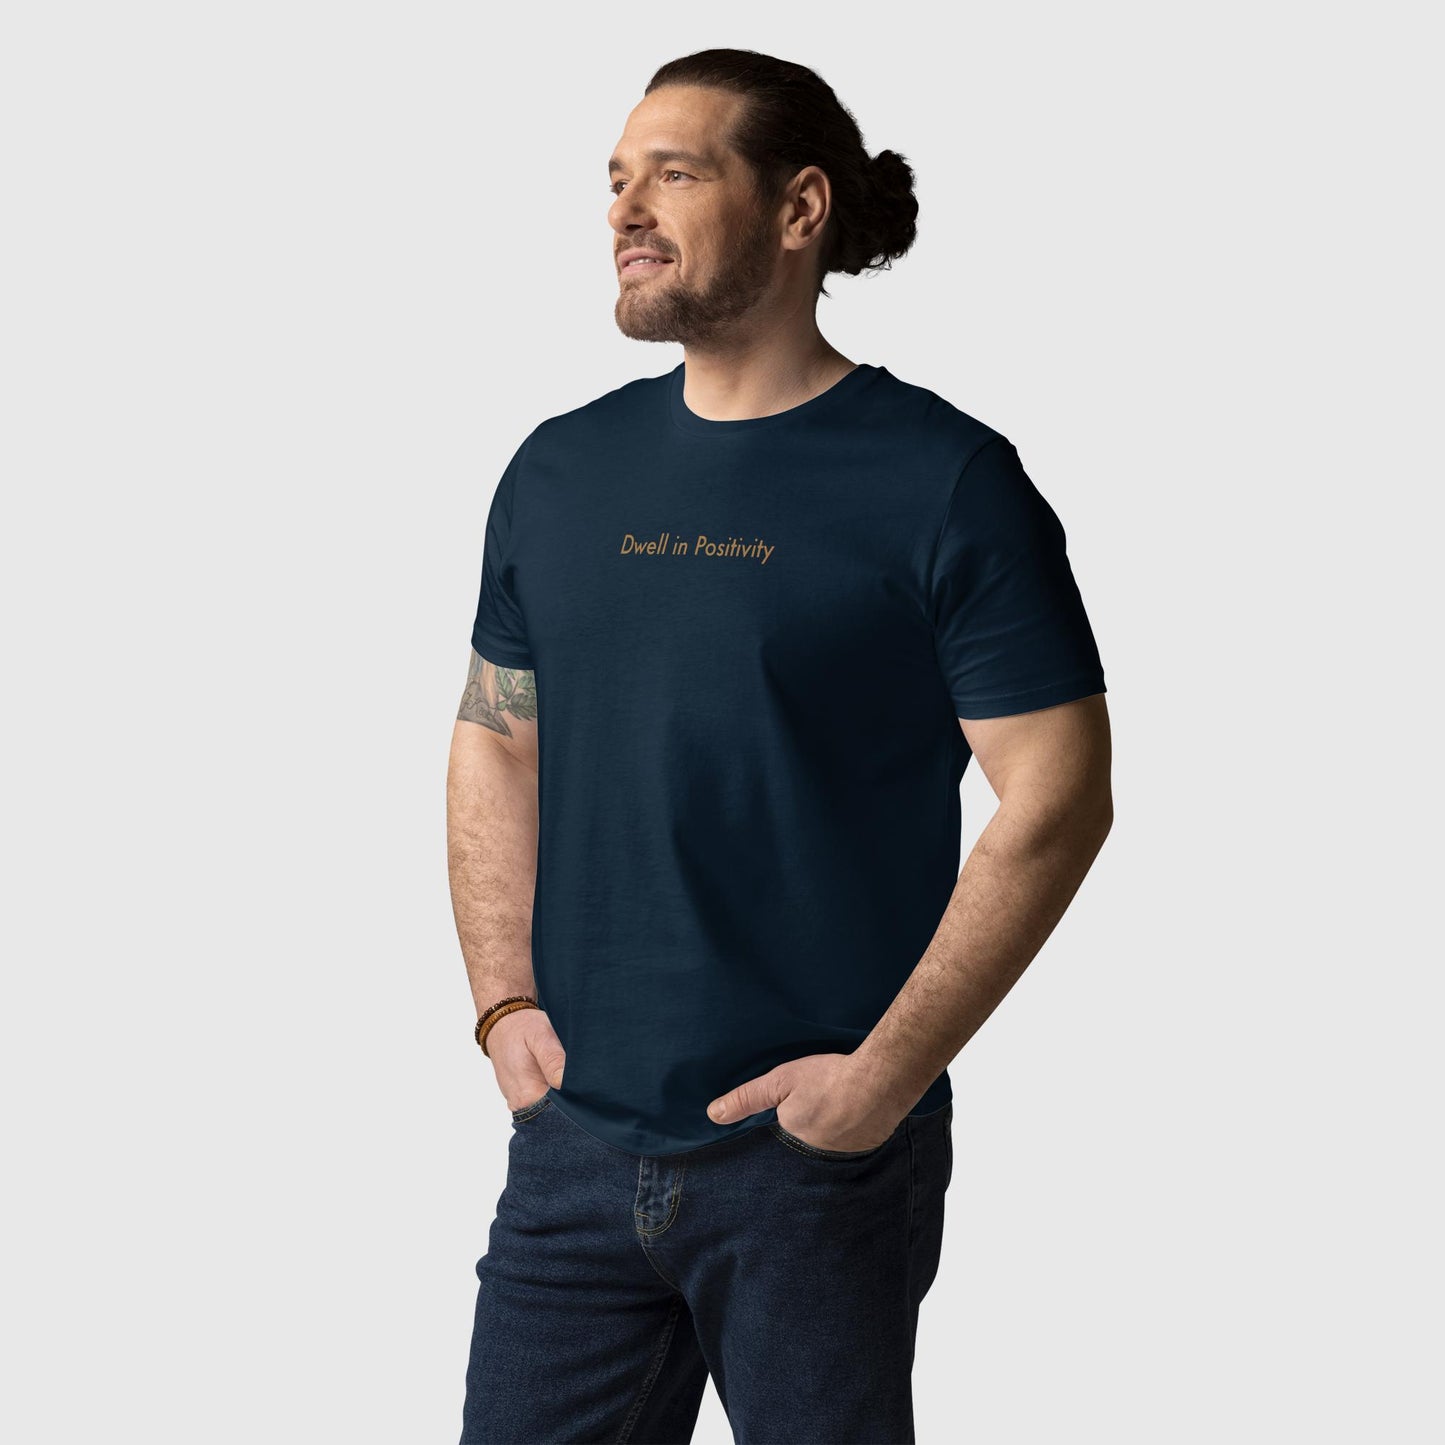 Men's french navy organic cotton t-shirt that features Emily Dickinson's quote, "I dwell in positivity."